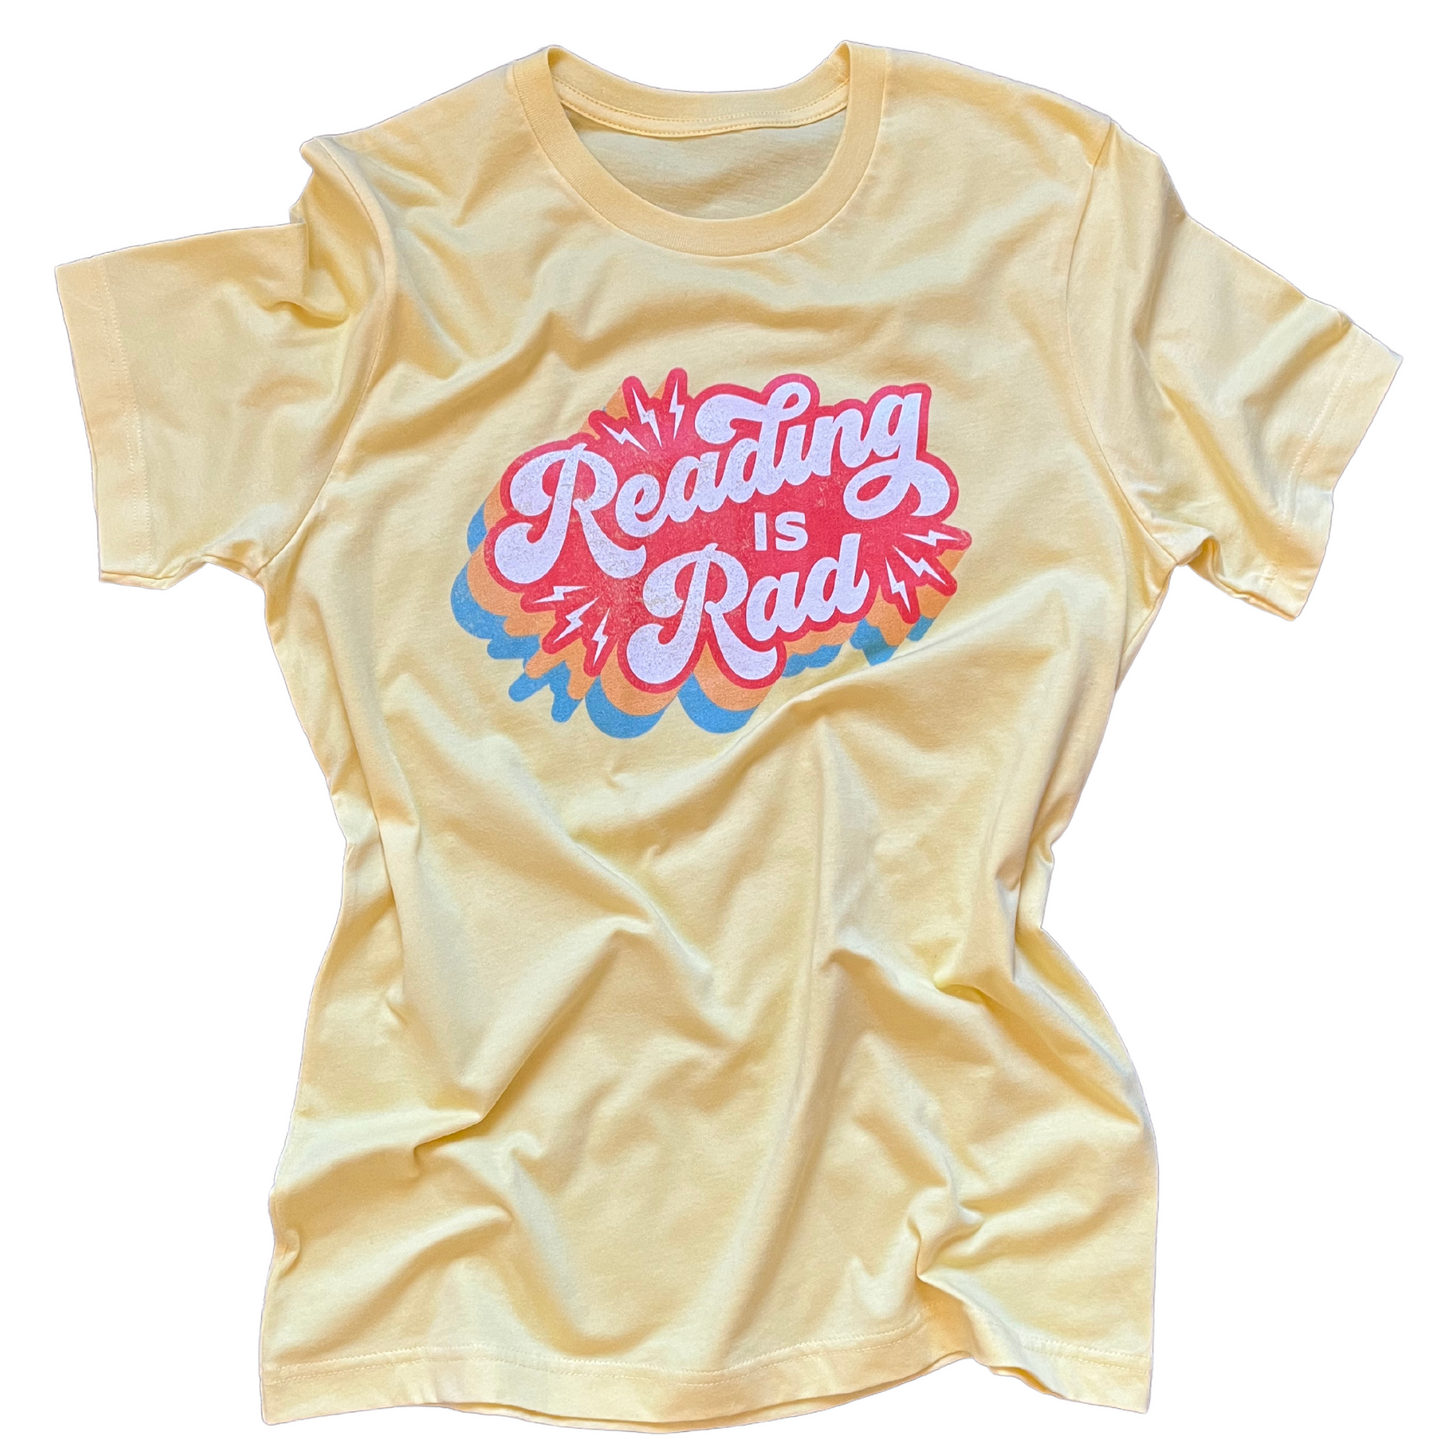 Reading is Rad Tee in Color